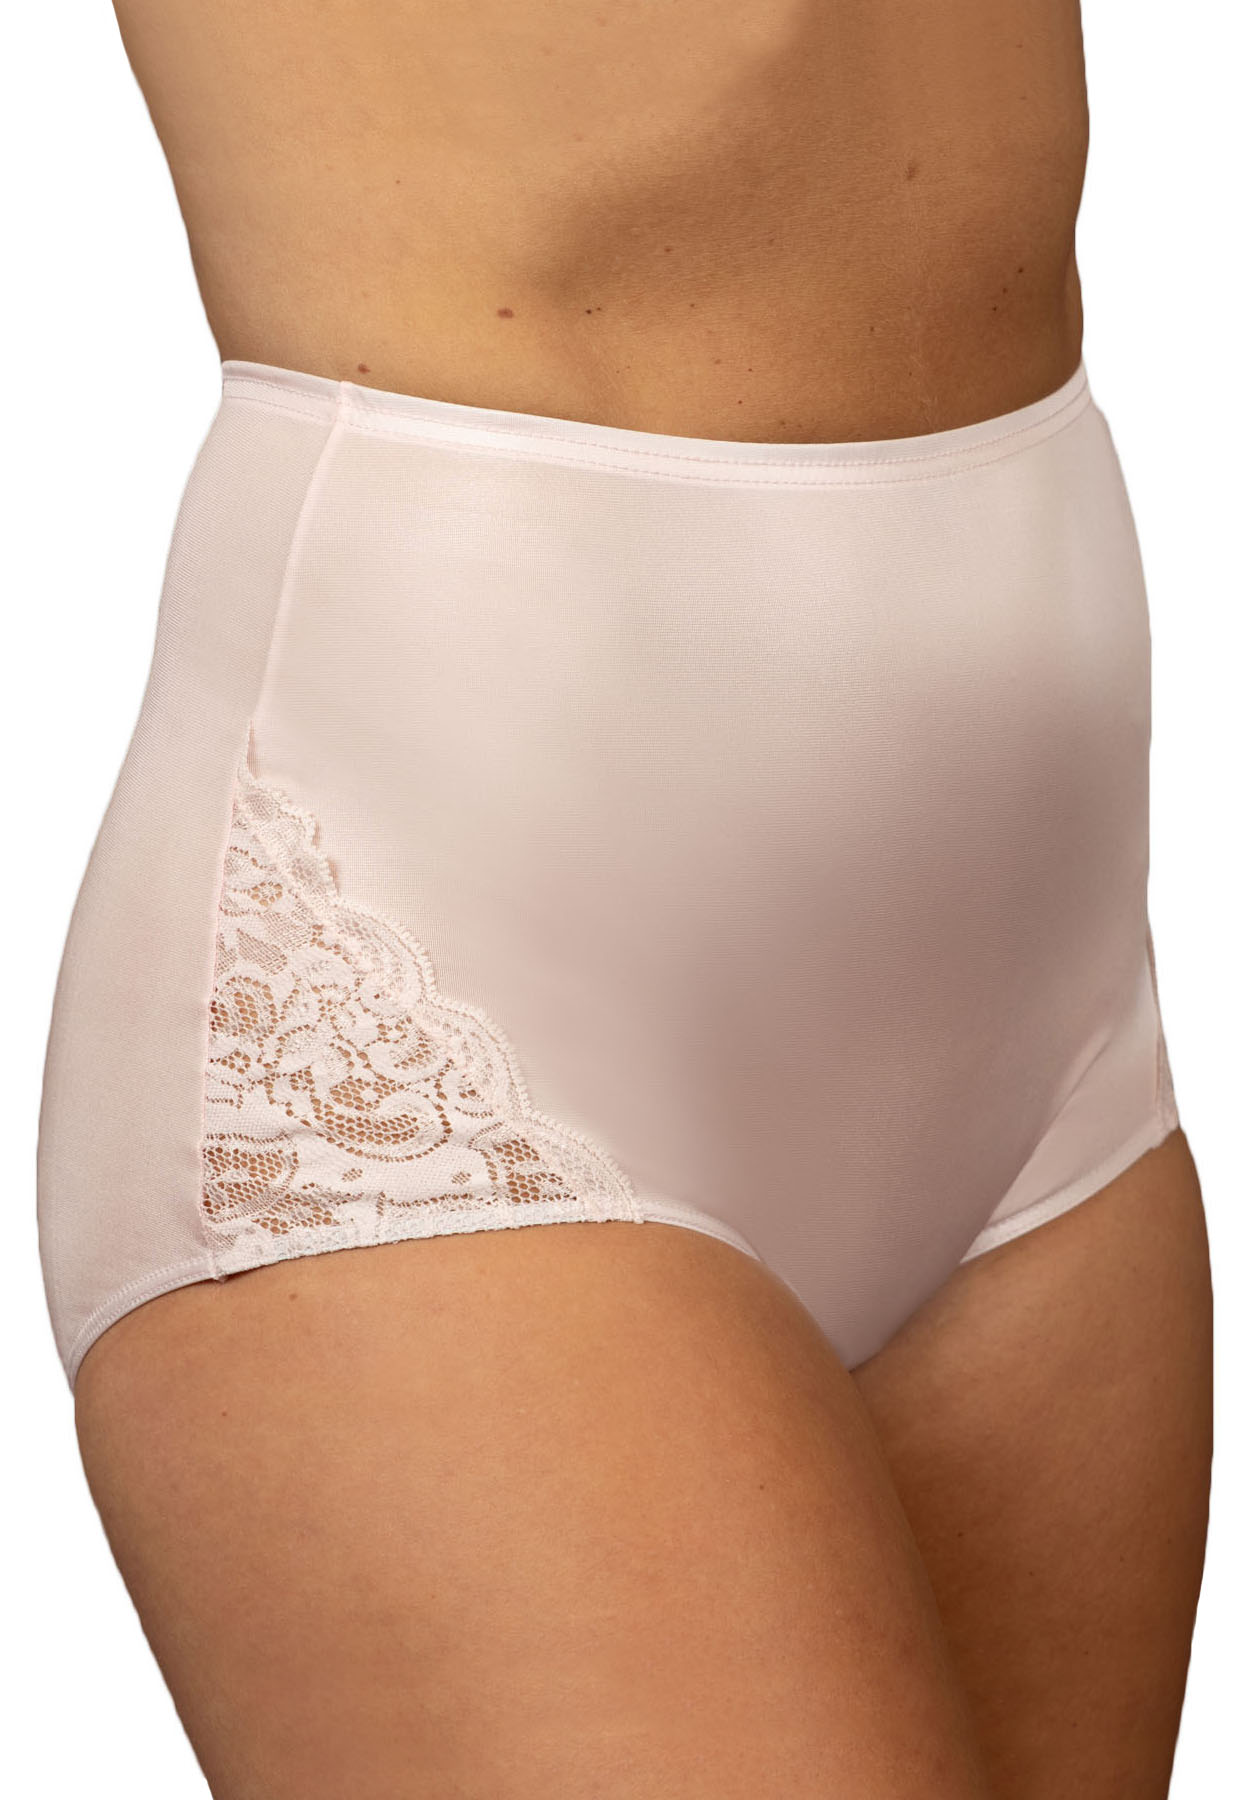 Velrose Lingerie Shadowline Nylon Full Brief Panty with Lace, 3-Pack  17082/17082X-3PK